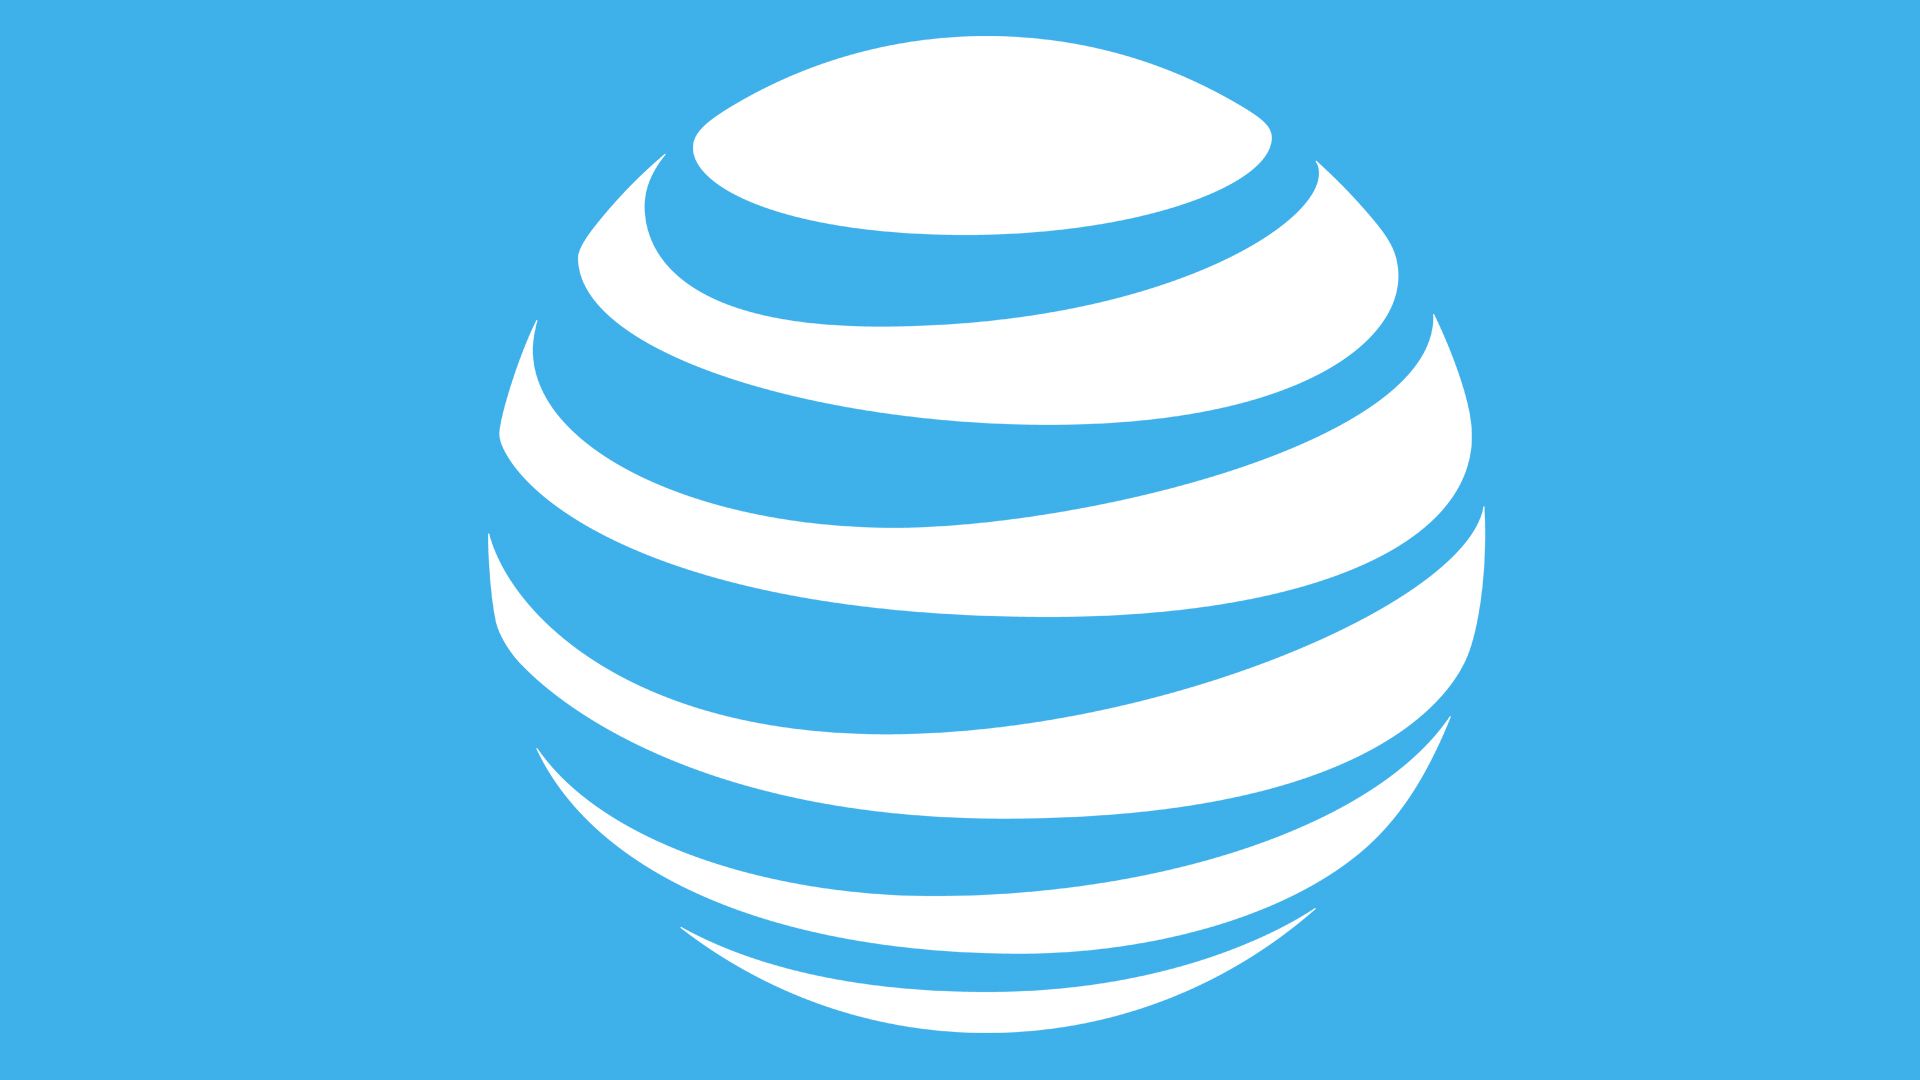 New AT&T Globe Logo - AT&T Logo, AT&T Symbol Meaning, History and Evolution